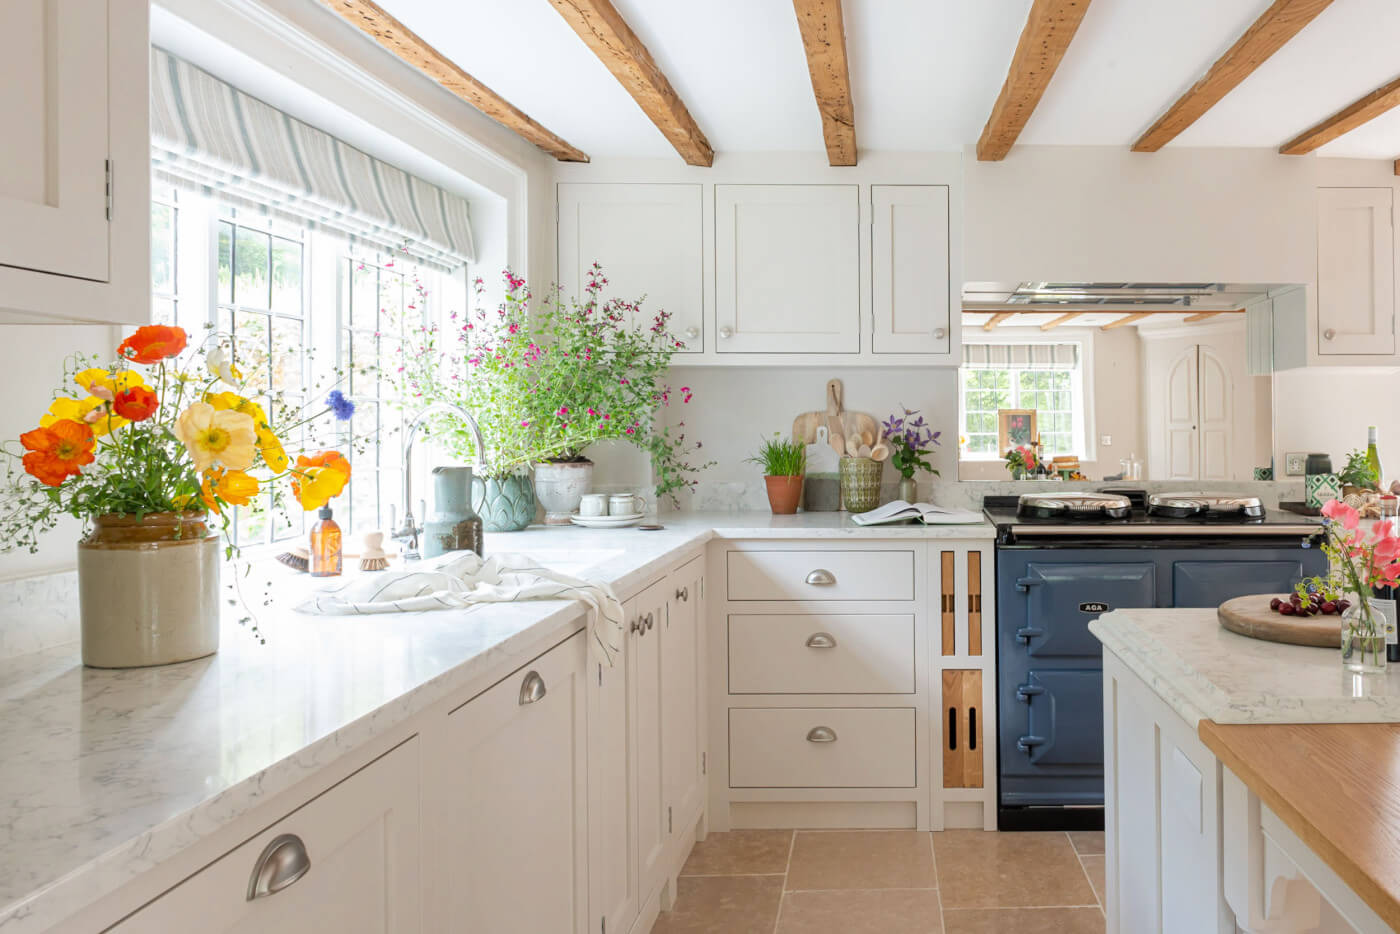 Designing kitchens for Grade listed Country Houses